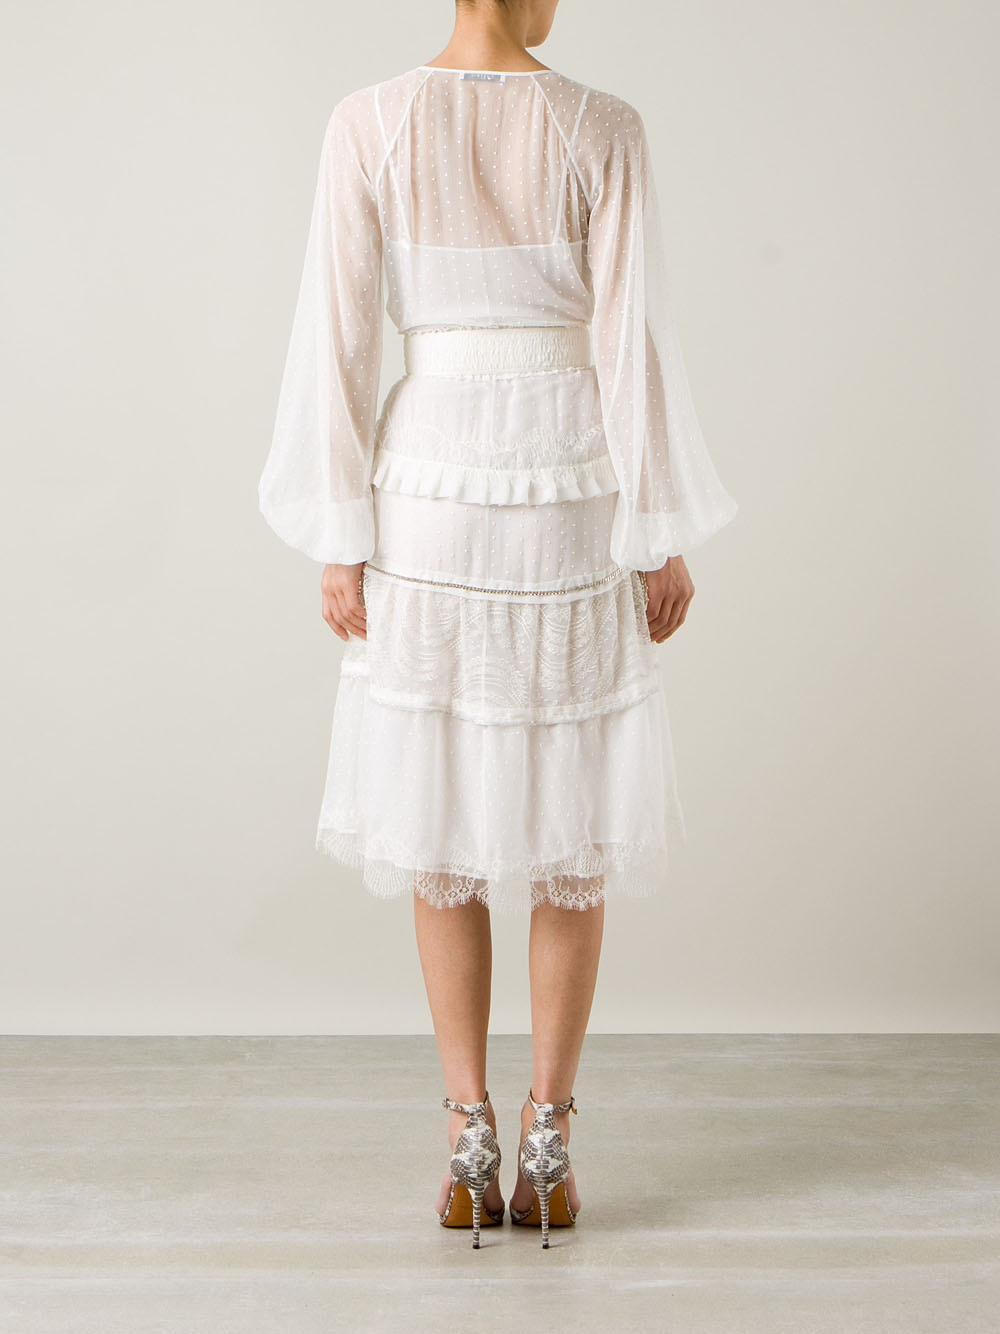 Lyst - Givenchy Layered Lace Dress in White